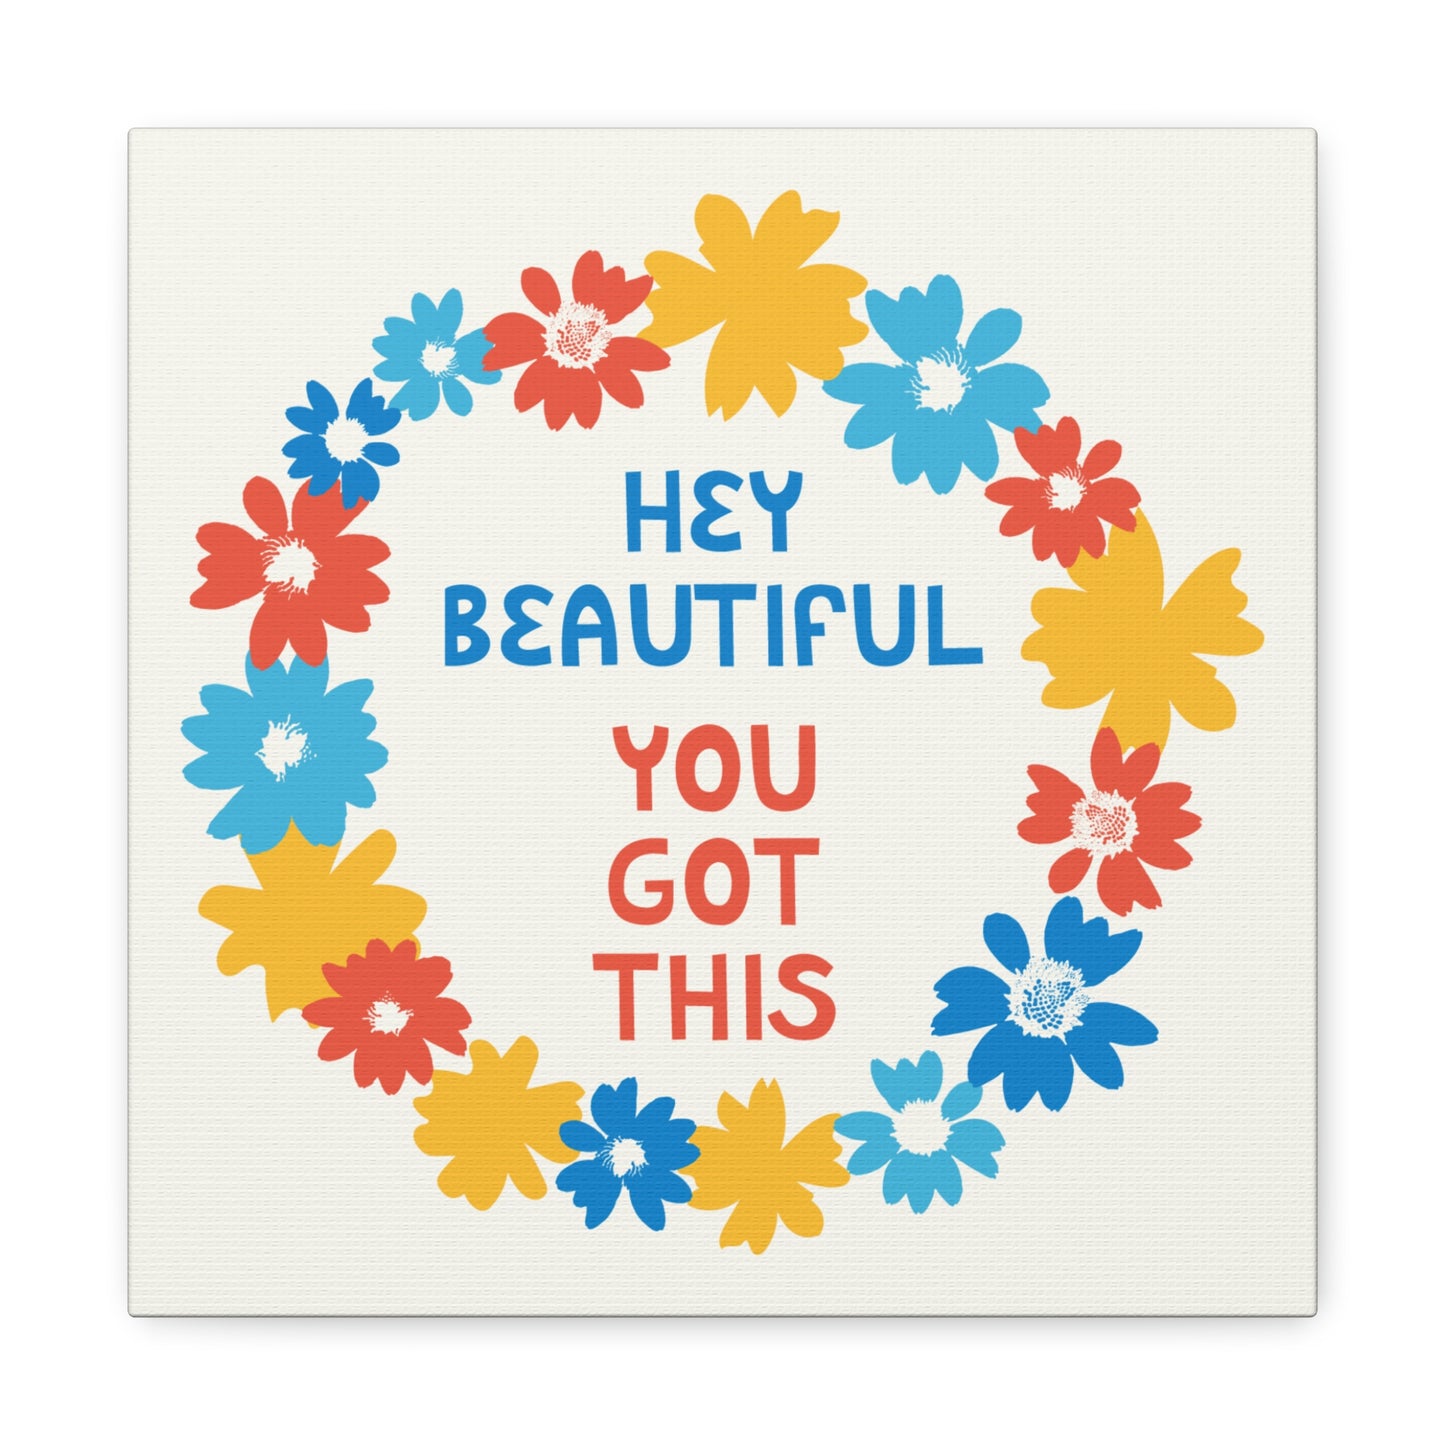 Hey Beautiful, You Got This Canvas Gallery Wrap